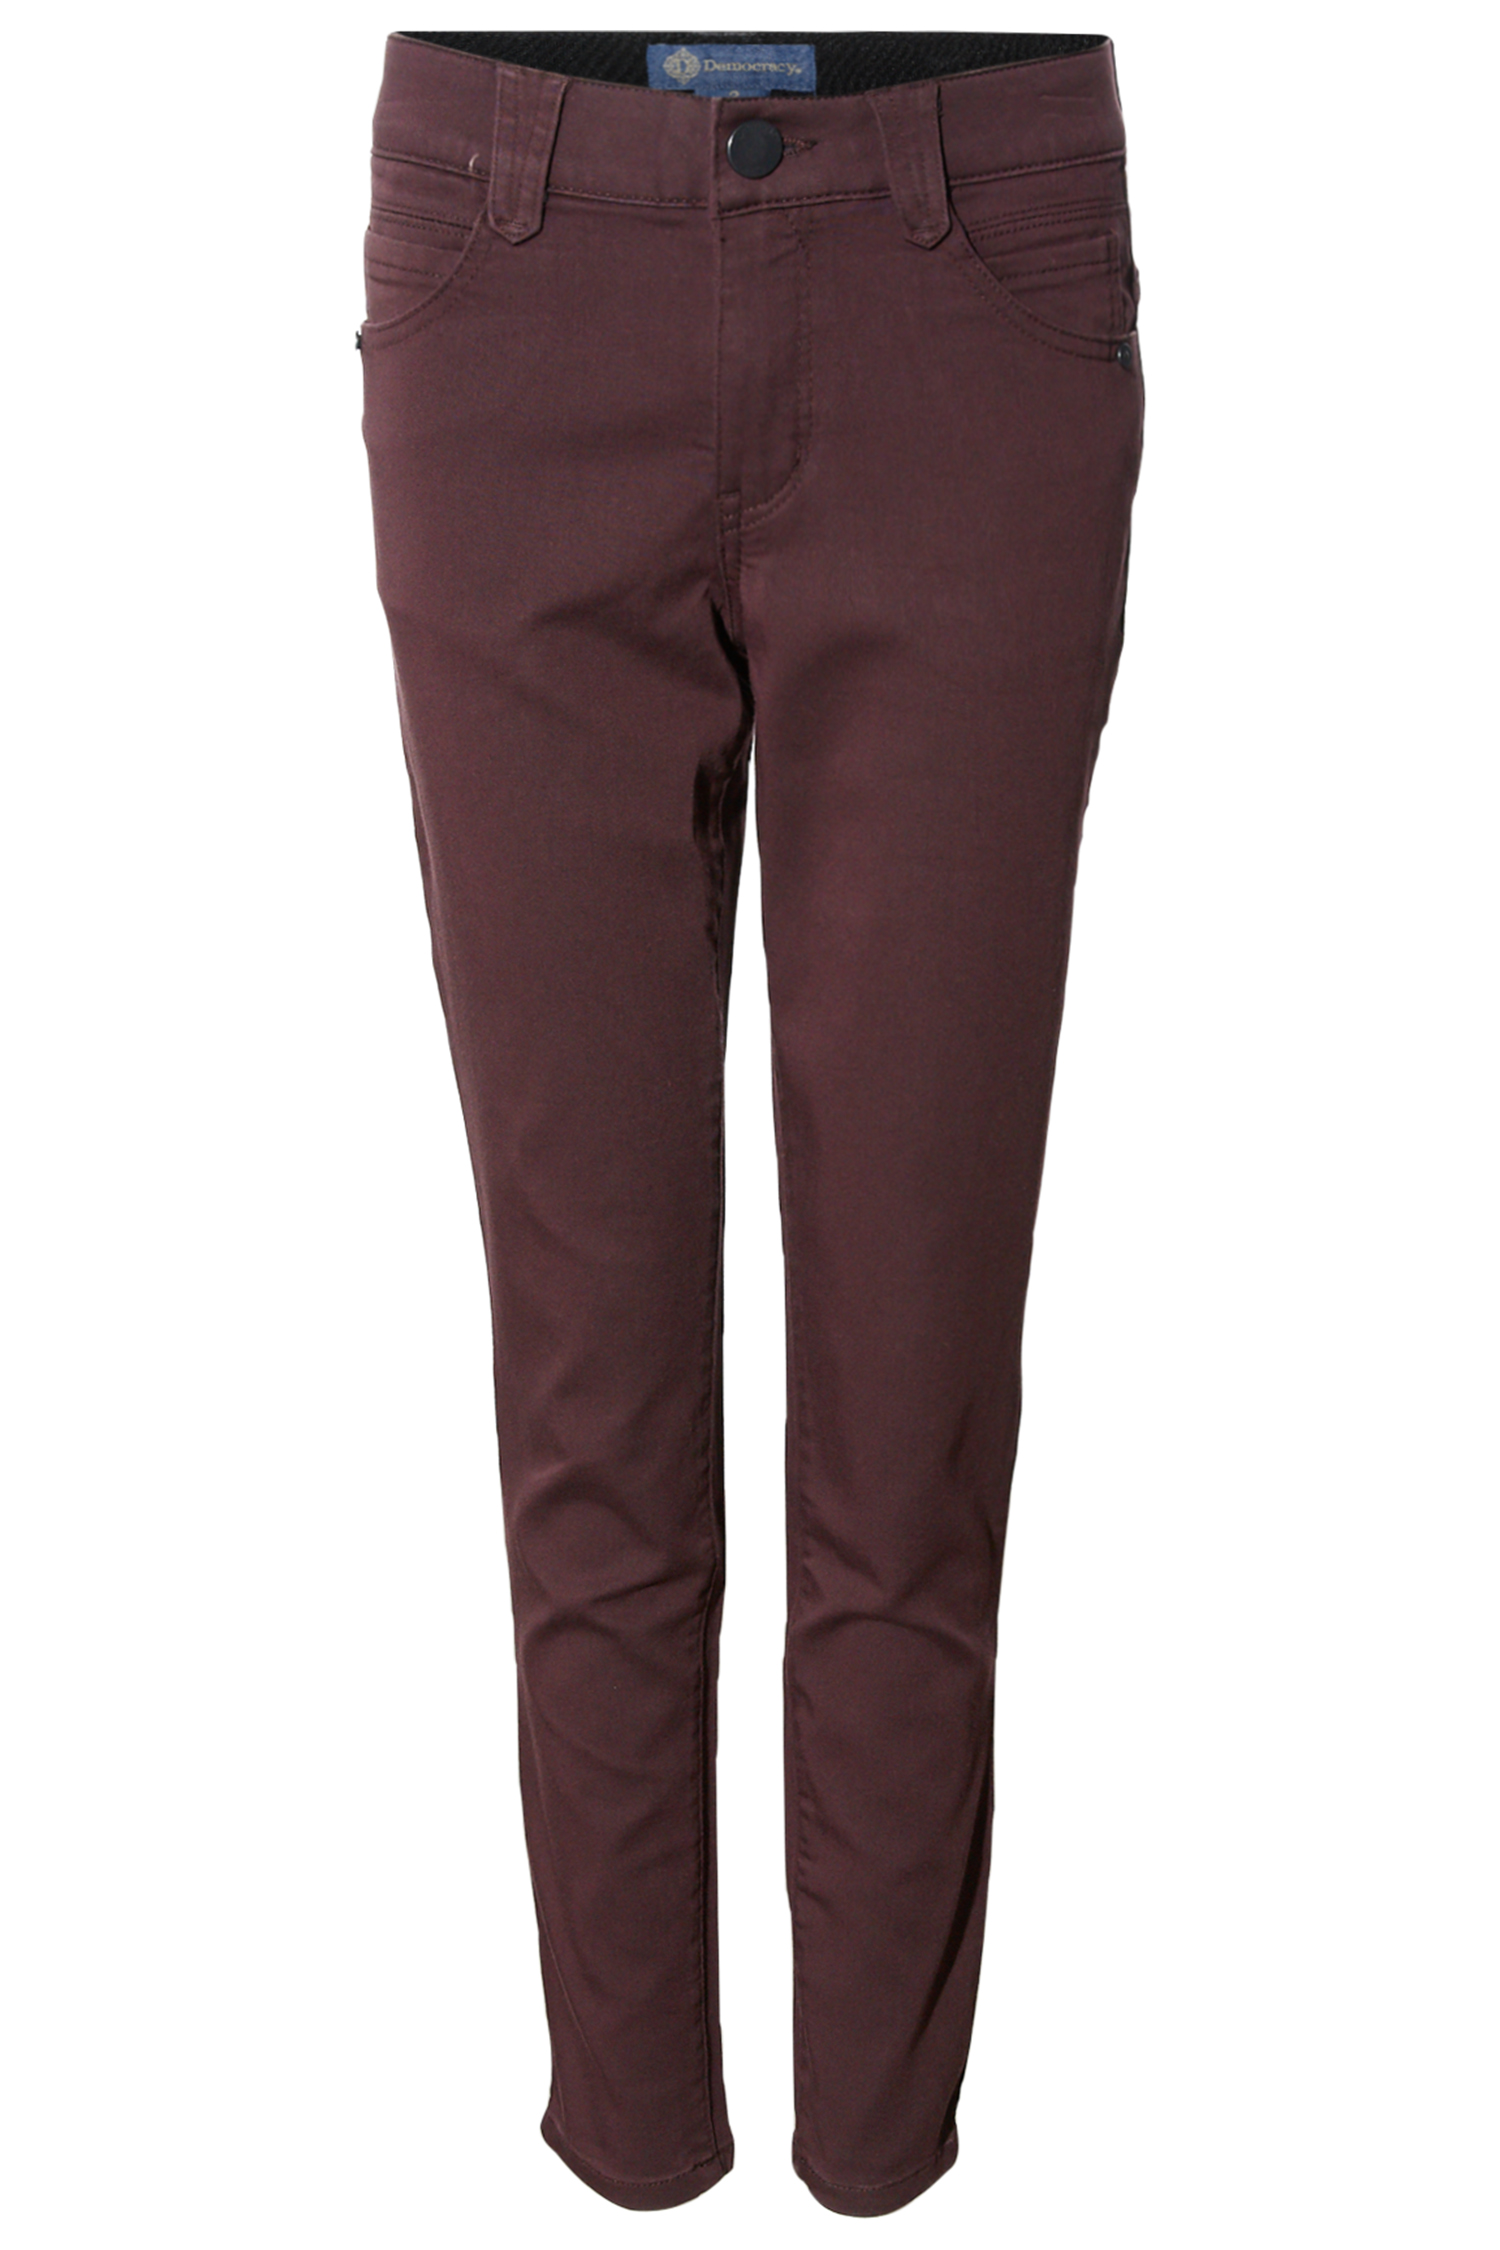 Democracy 'Ab'solution Color Ankle Pant